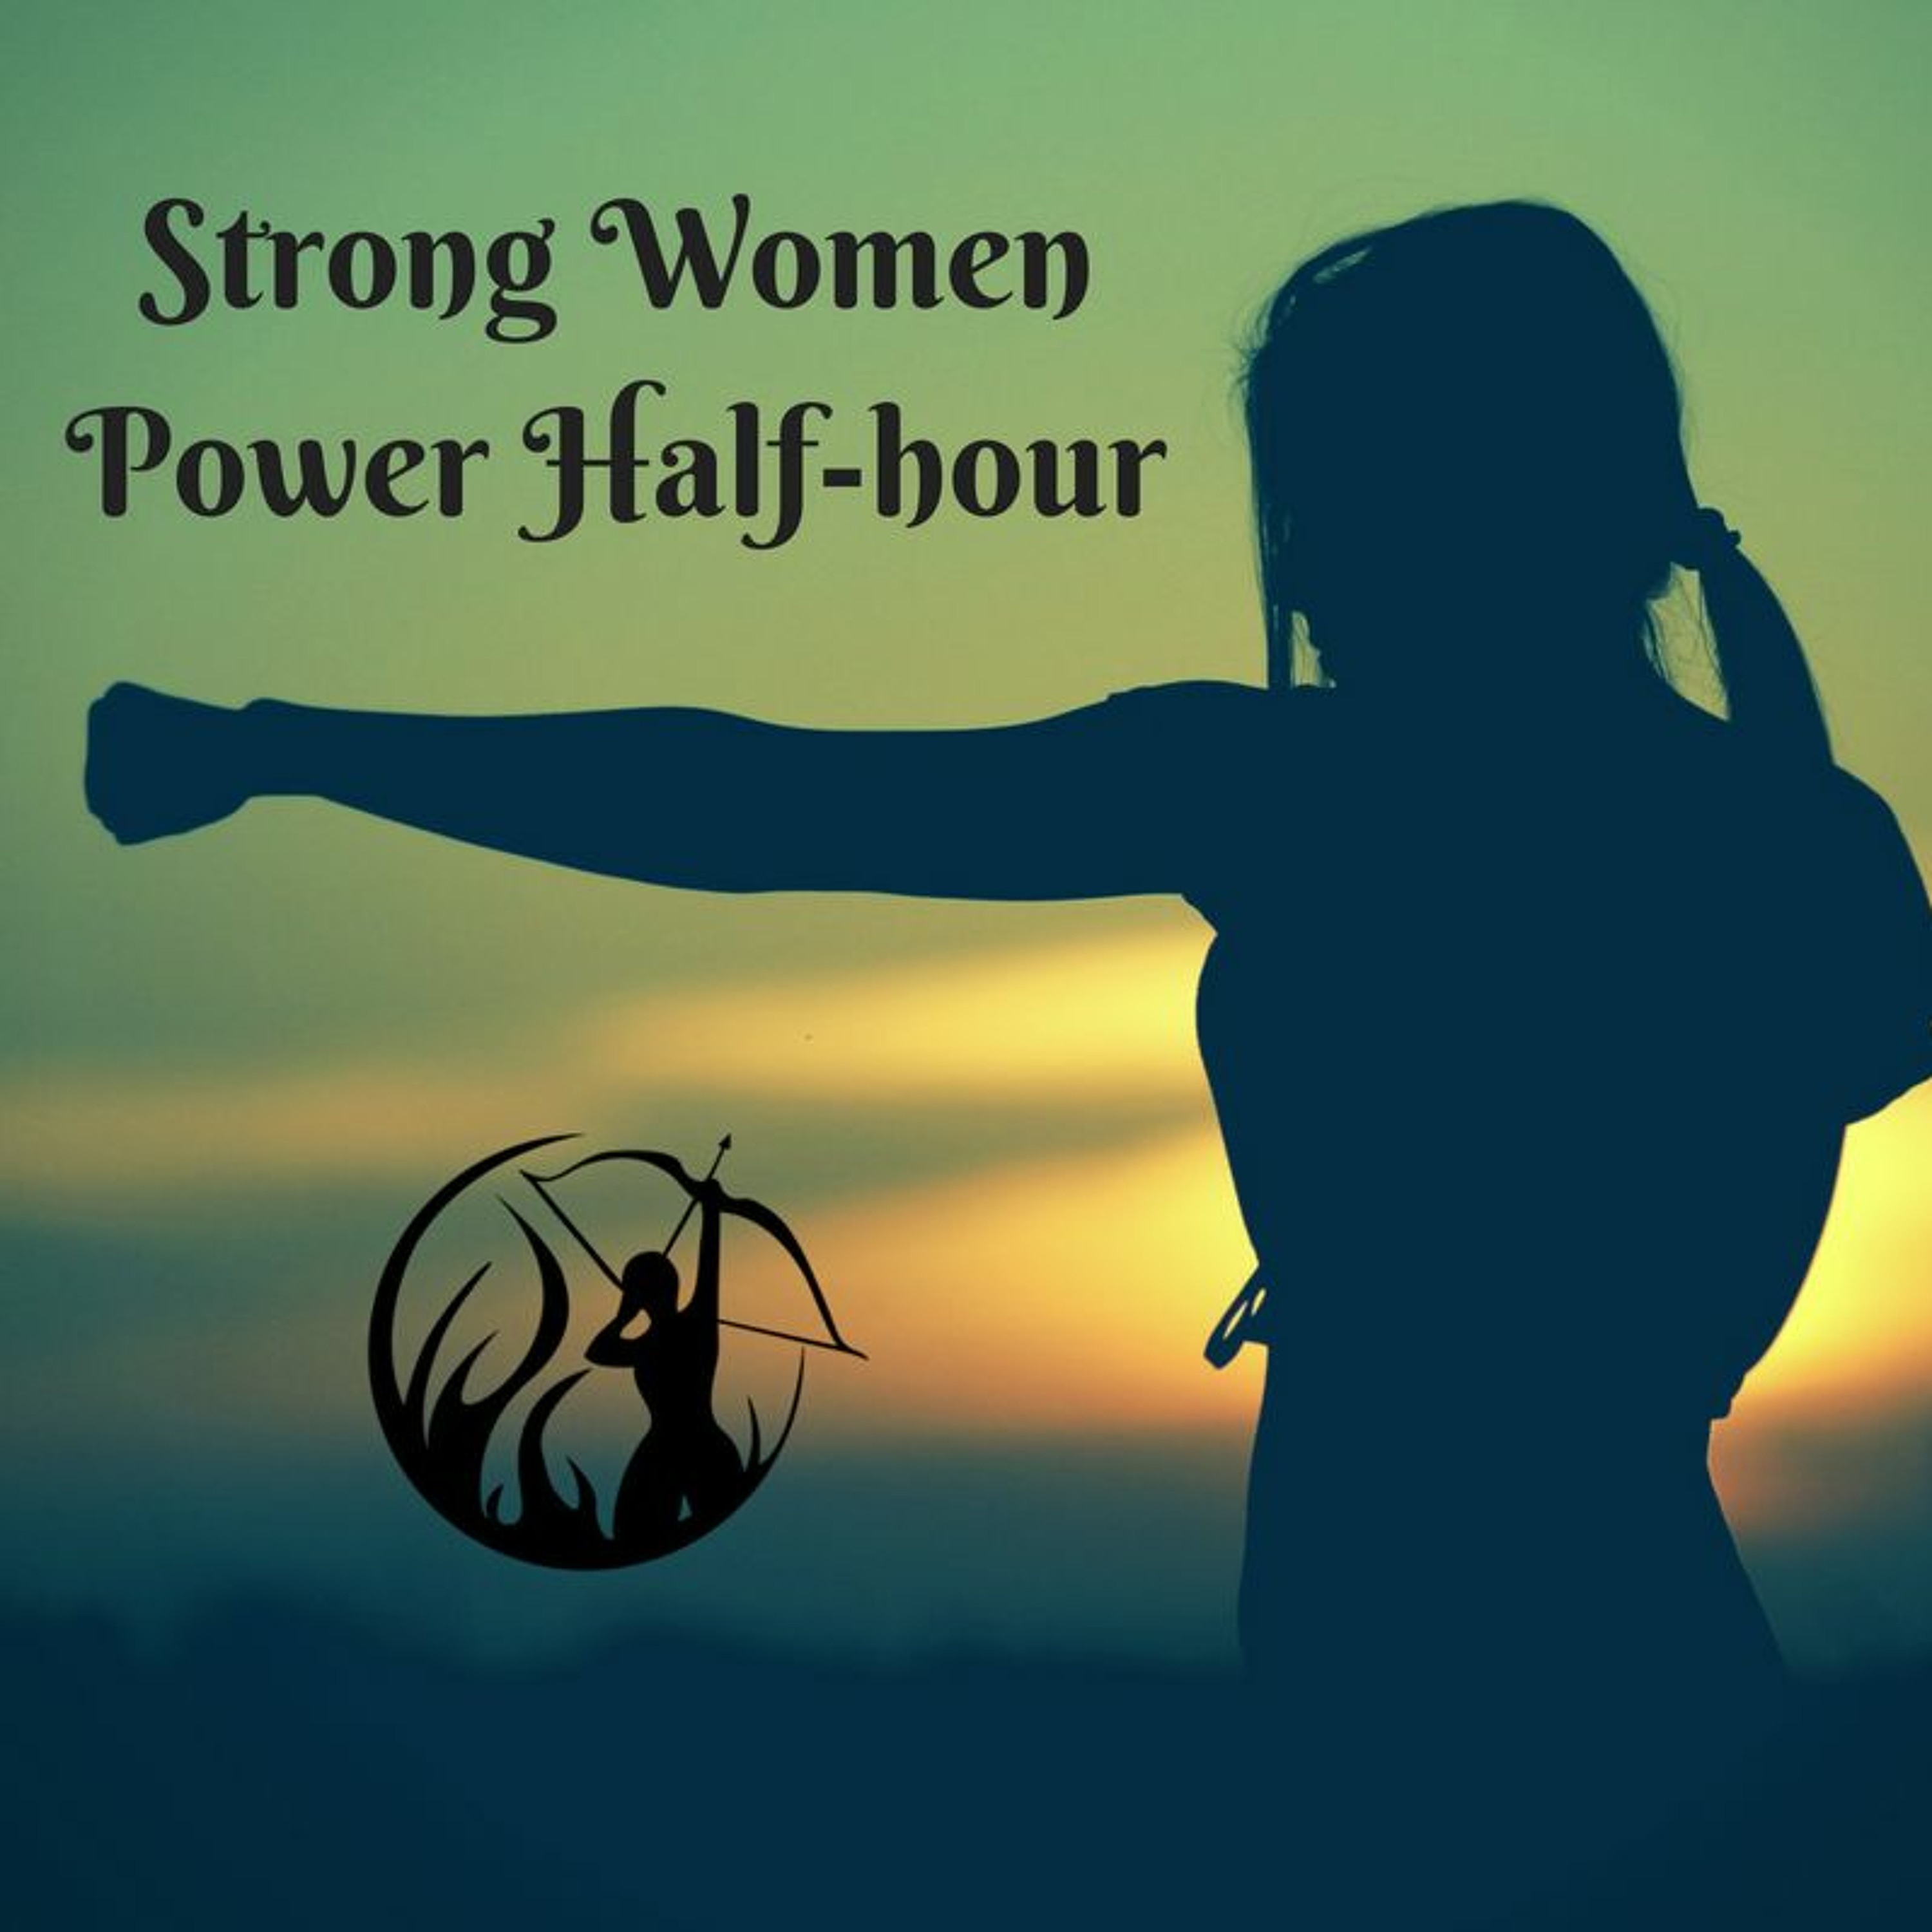 What makes a strong woman